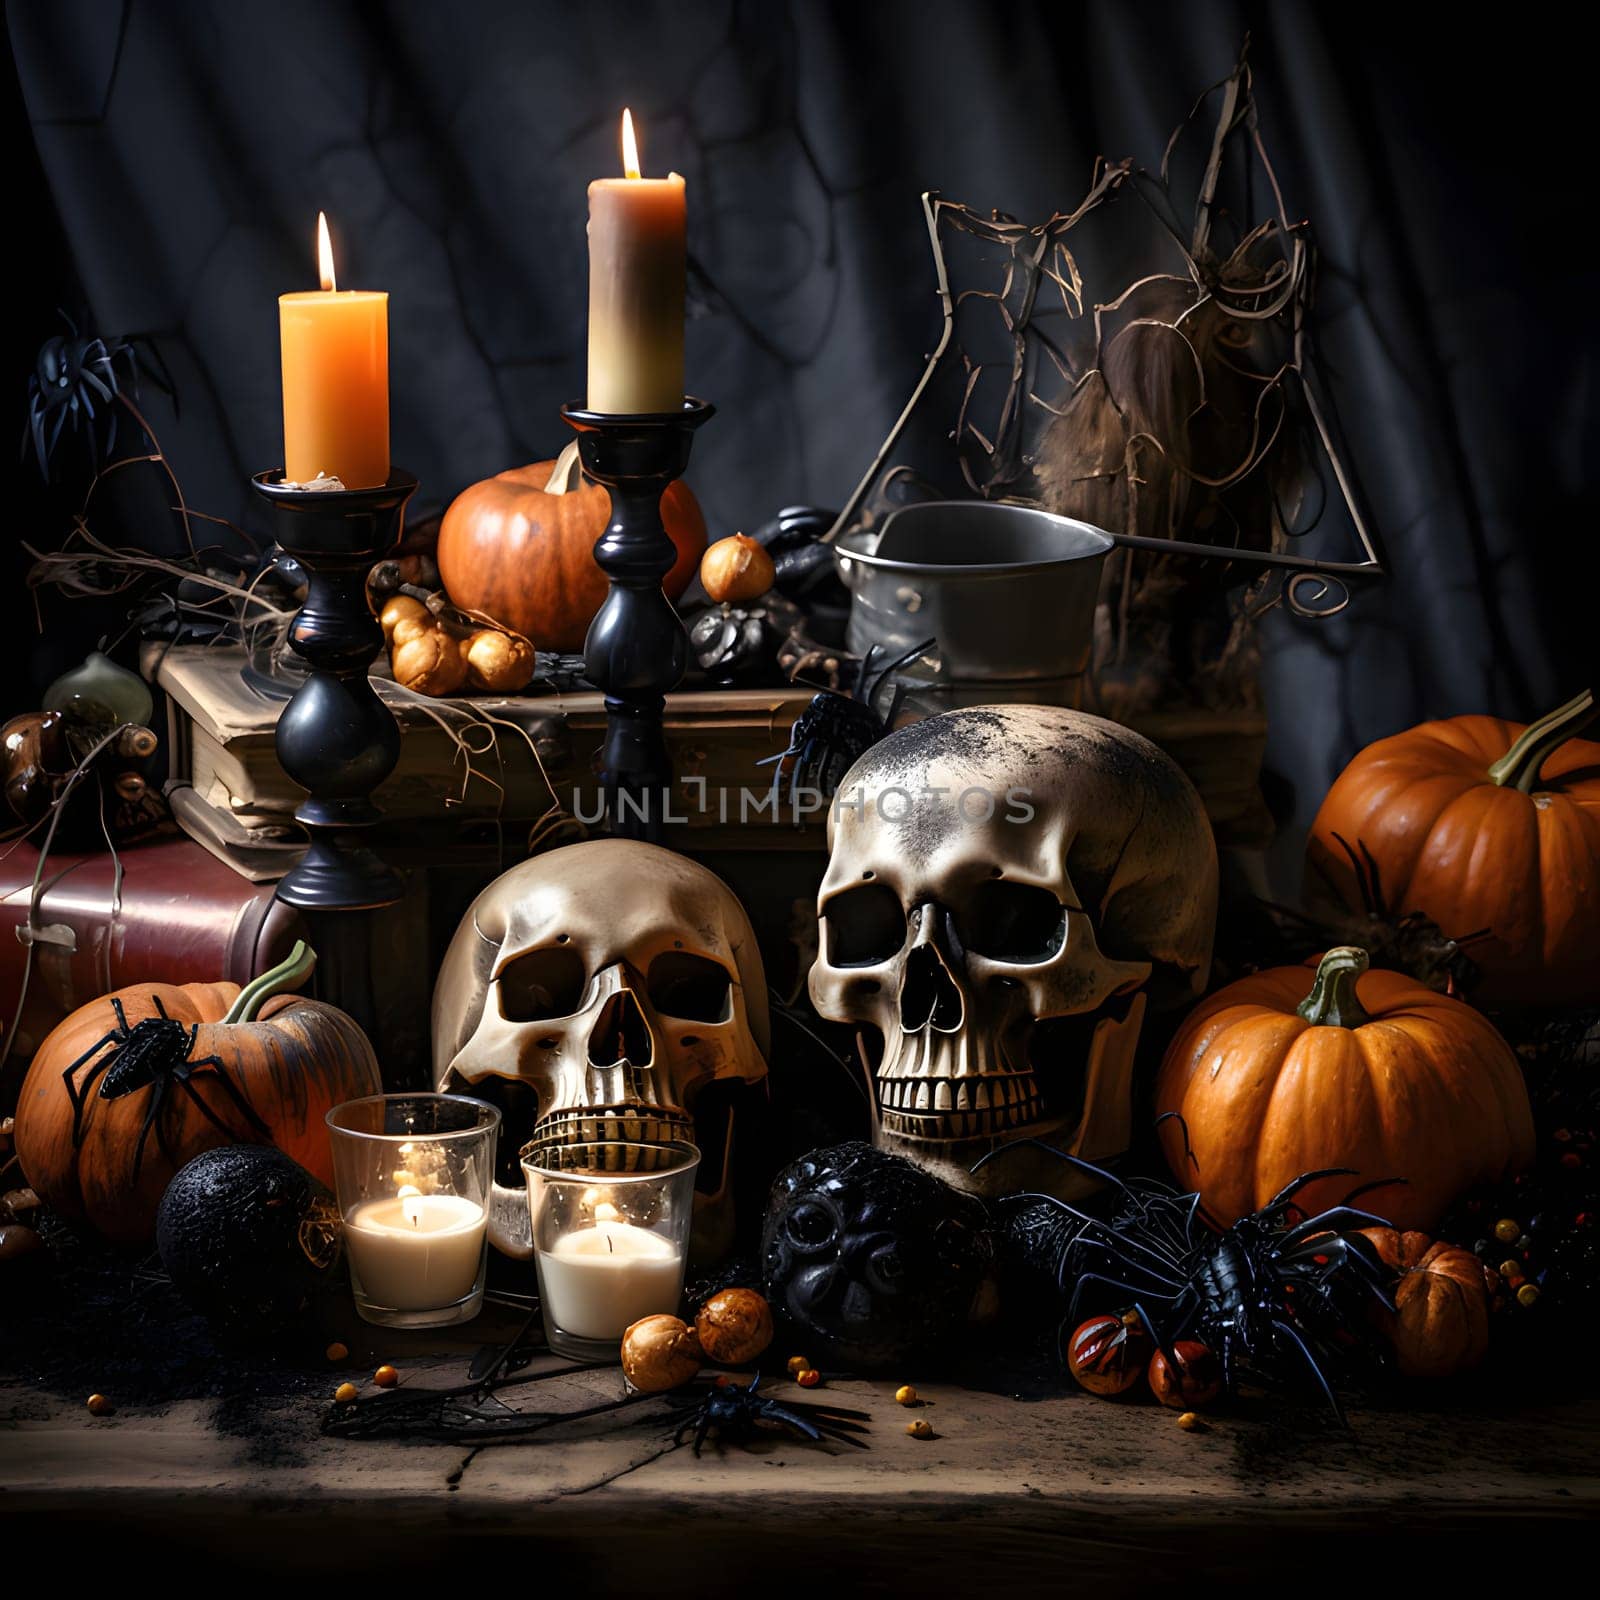 Skulls human pumpkins spiders, candles, dark table, a Halloween image. by ThemesS